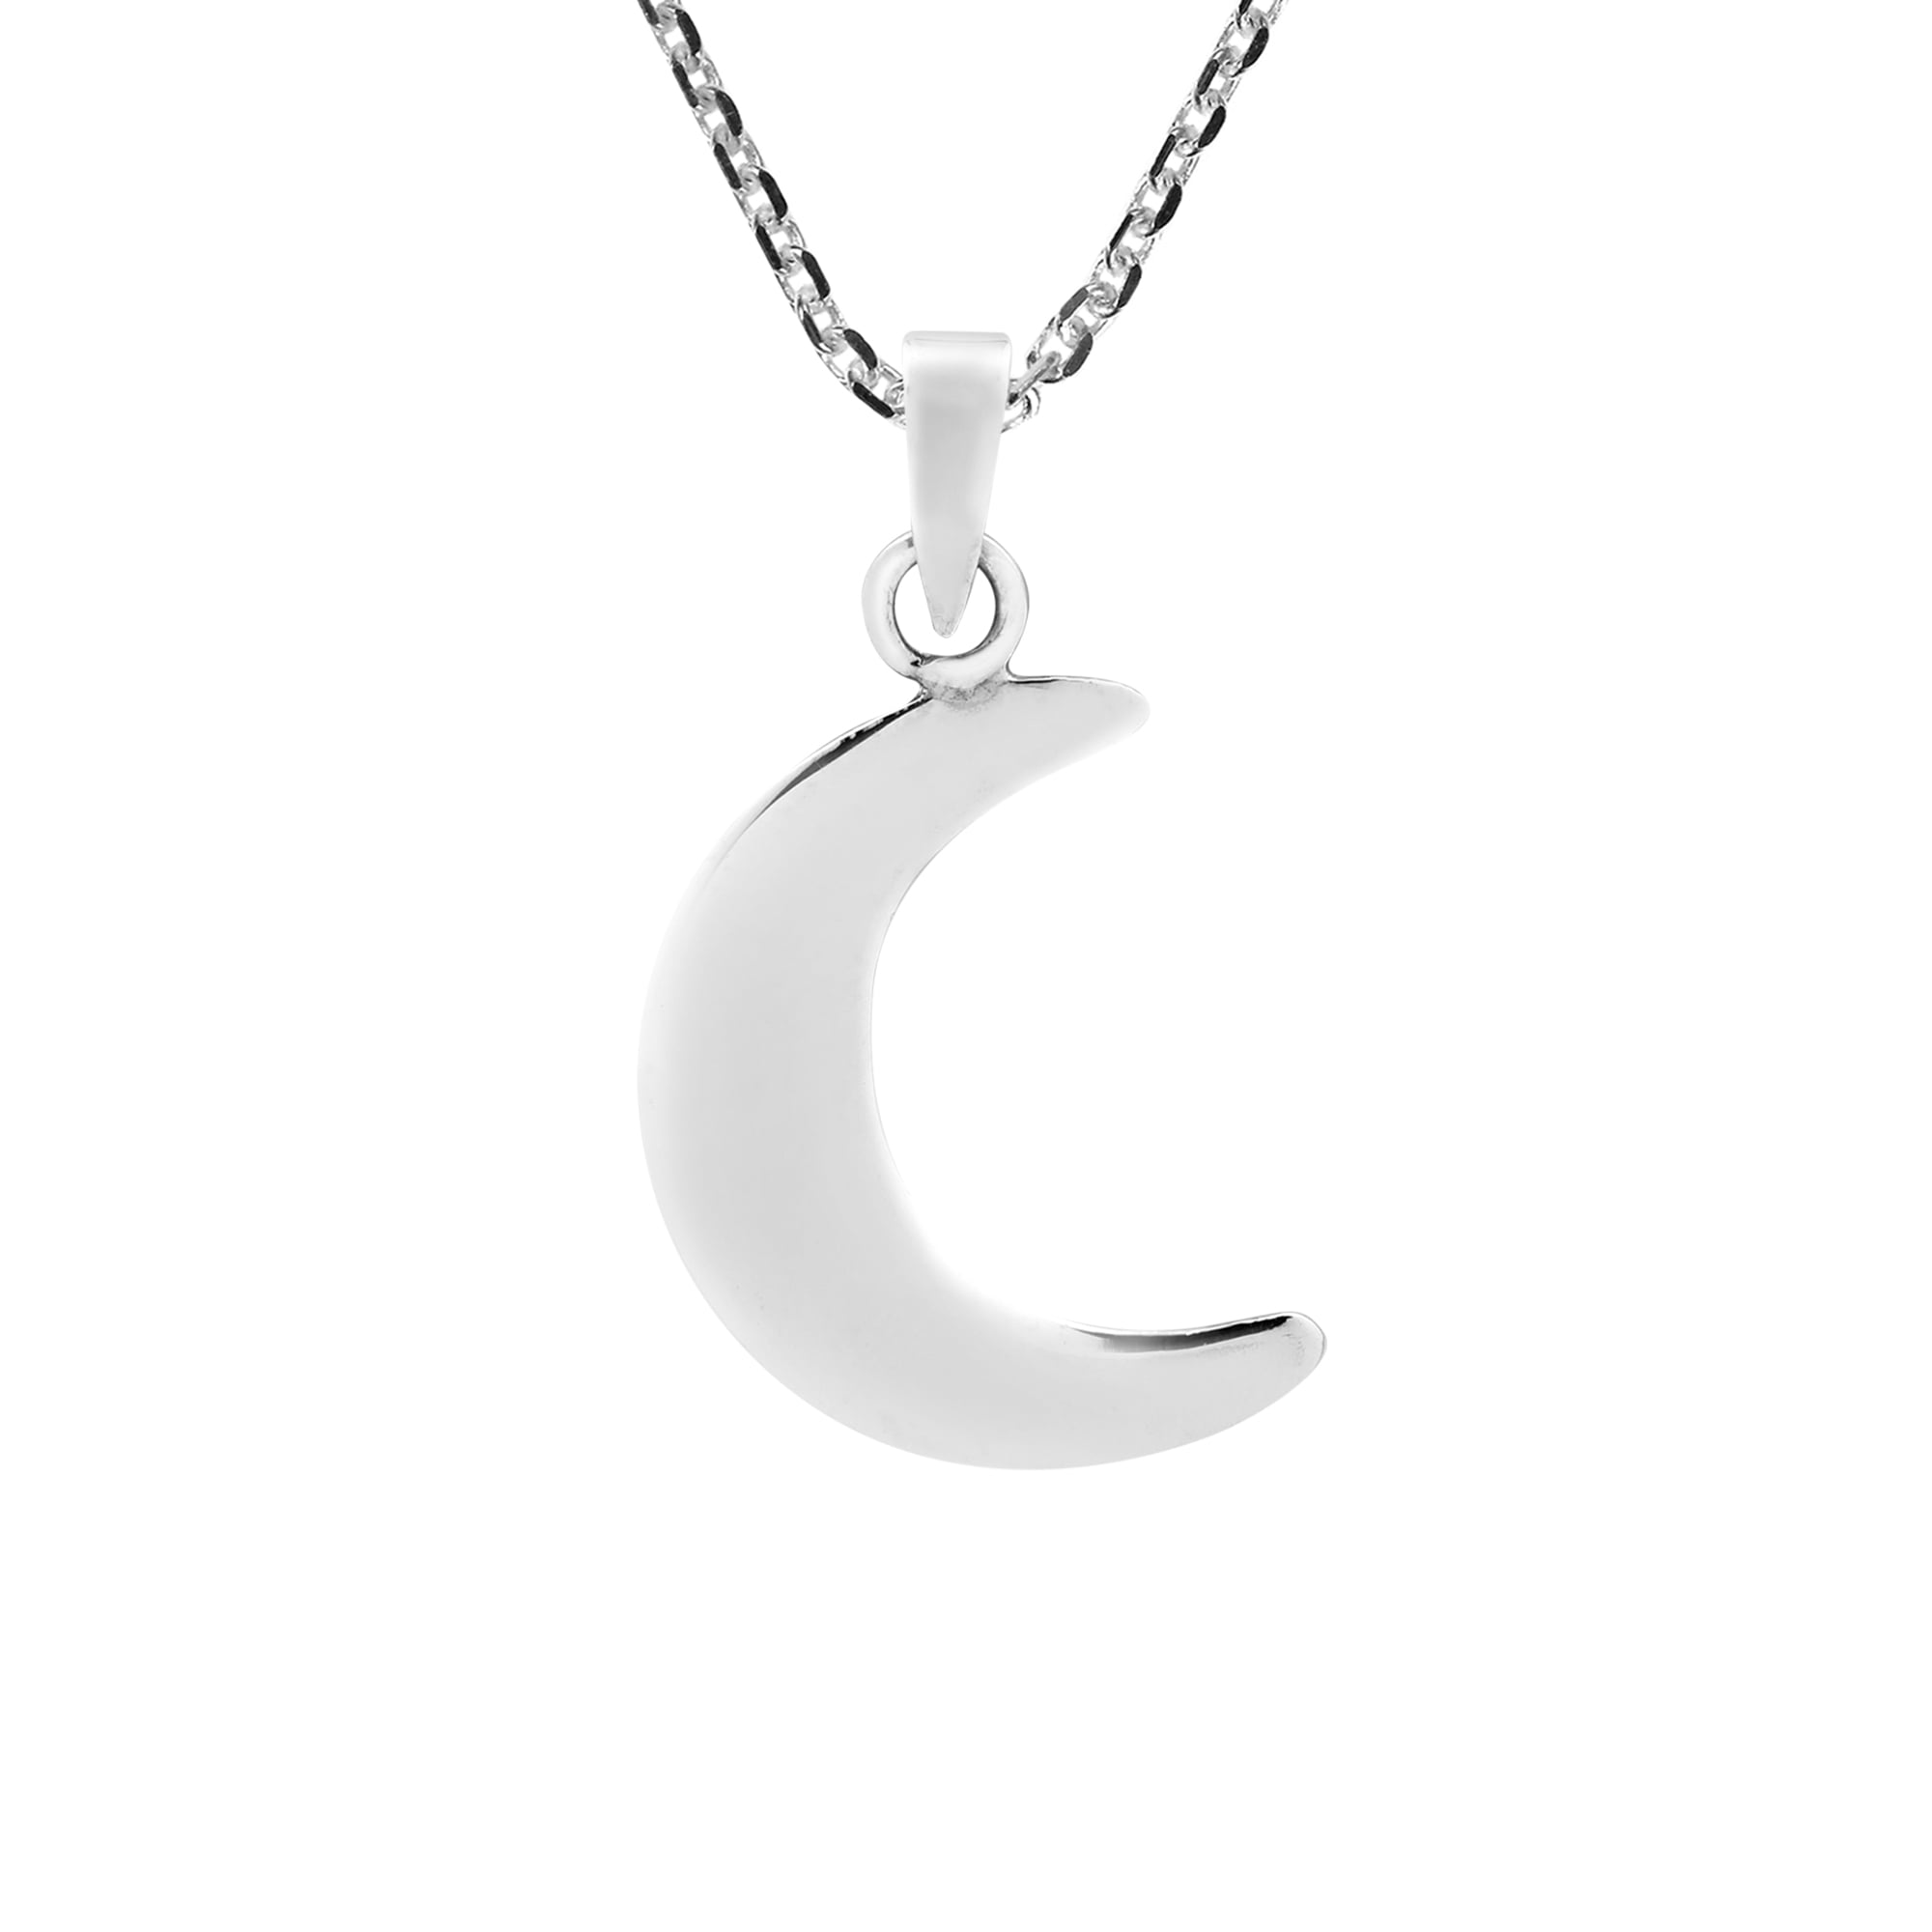 Moonlight Collections Dean Necklace Personalized Necklace Sterling